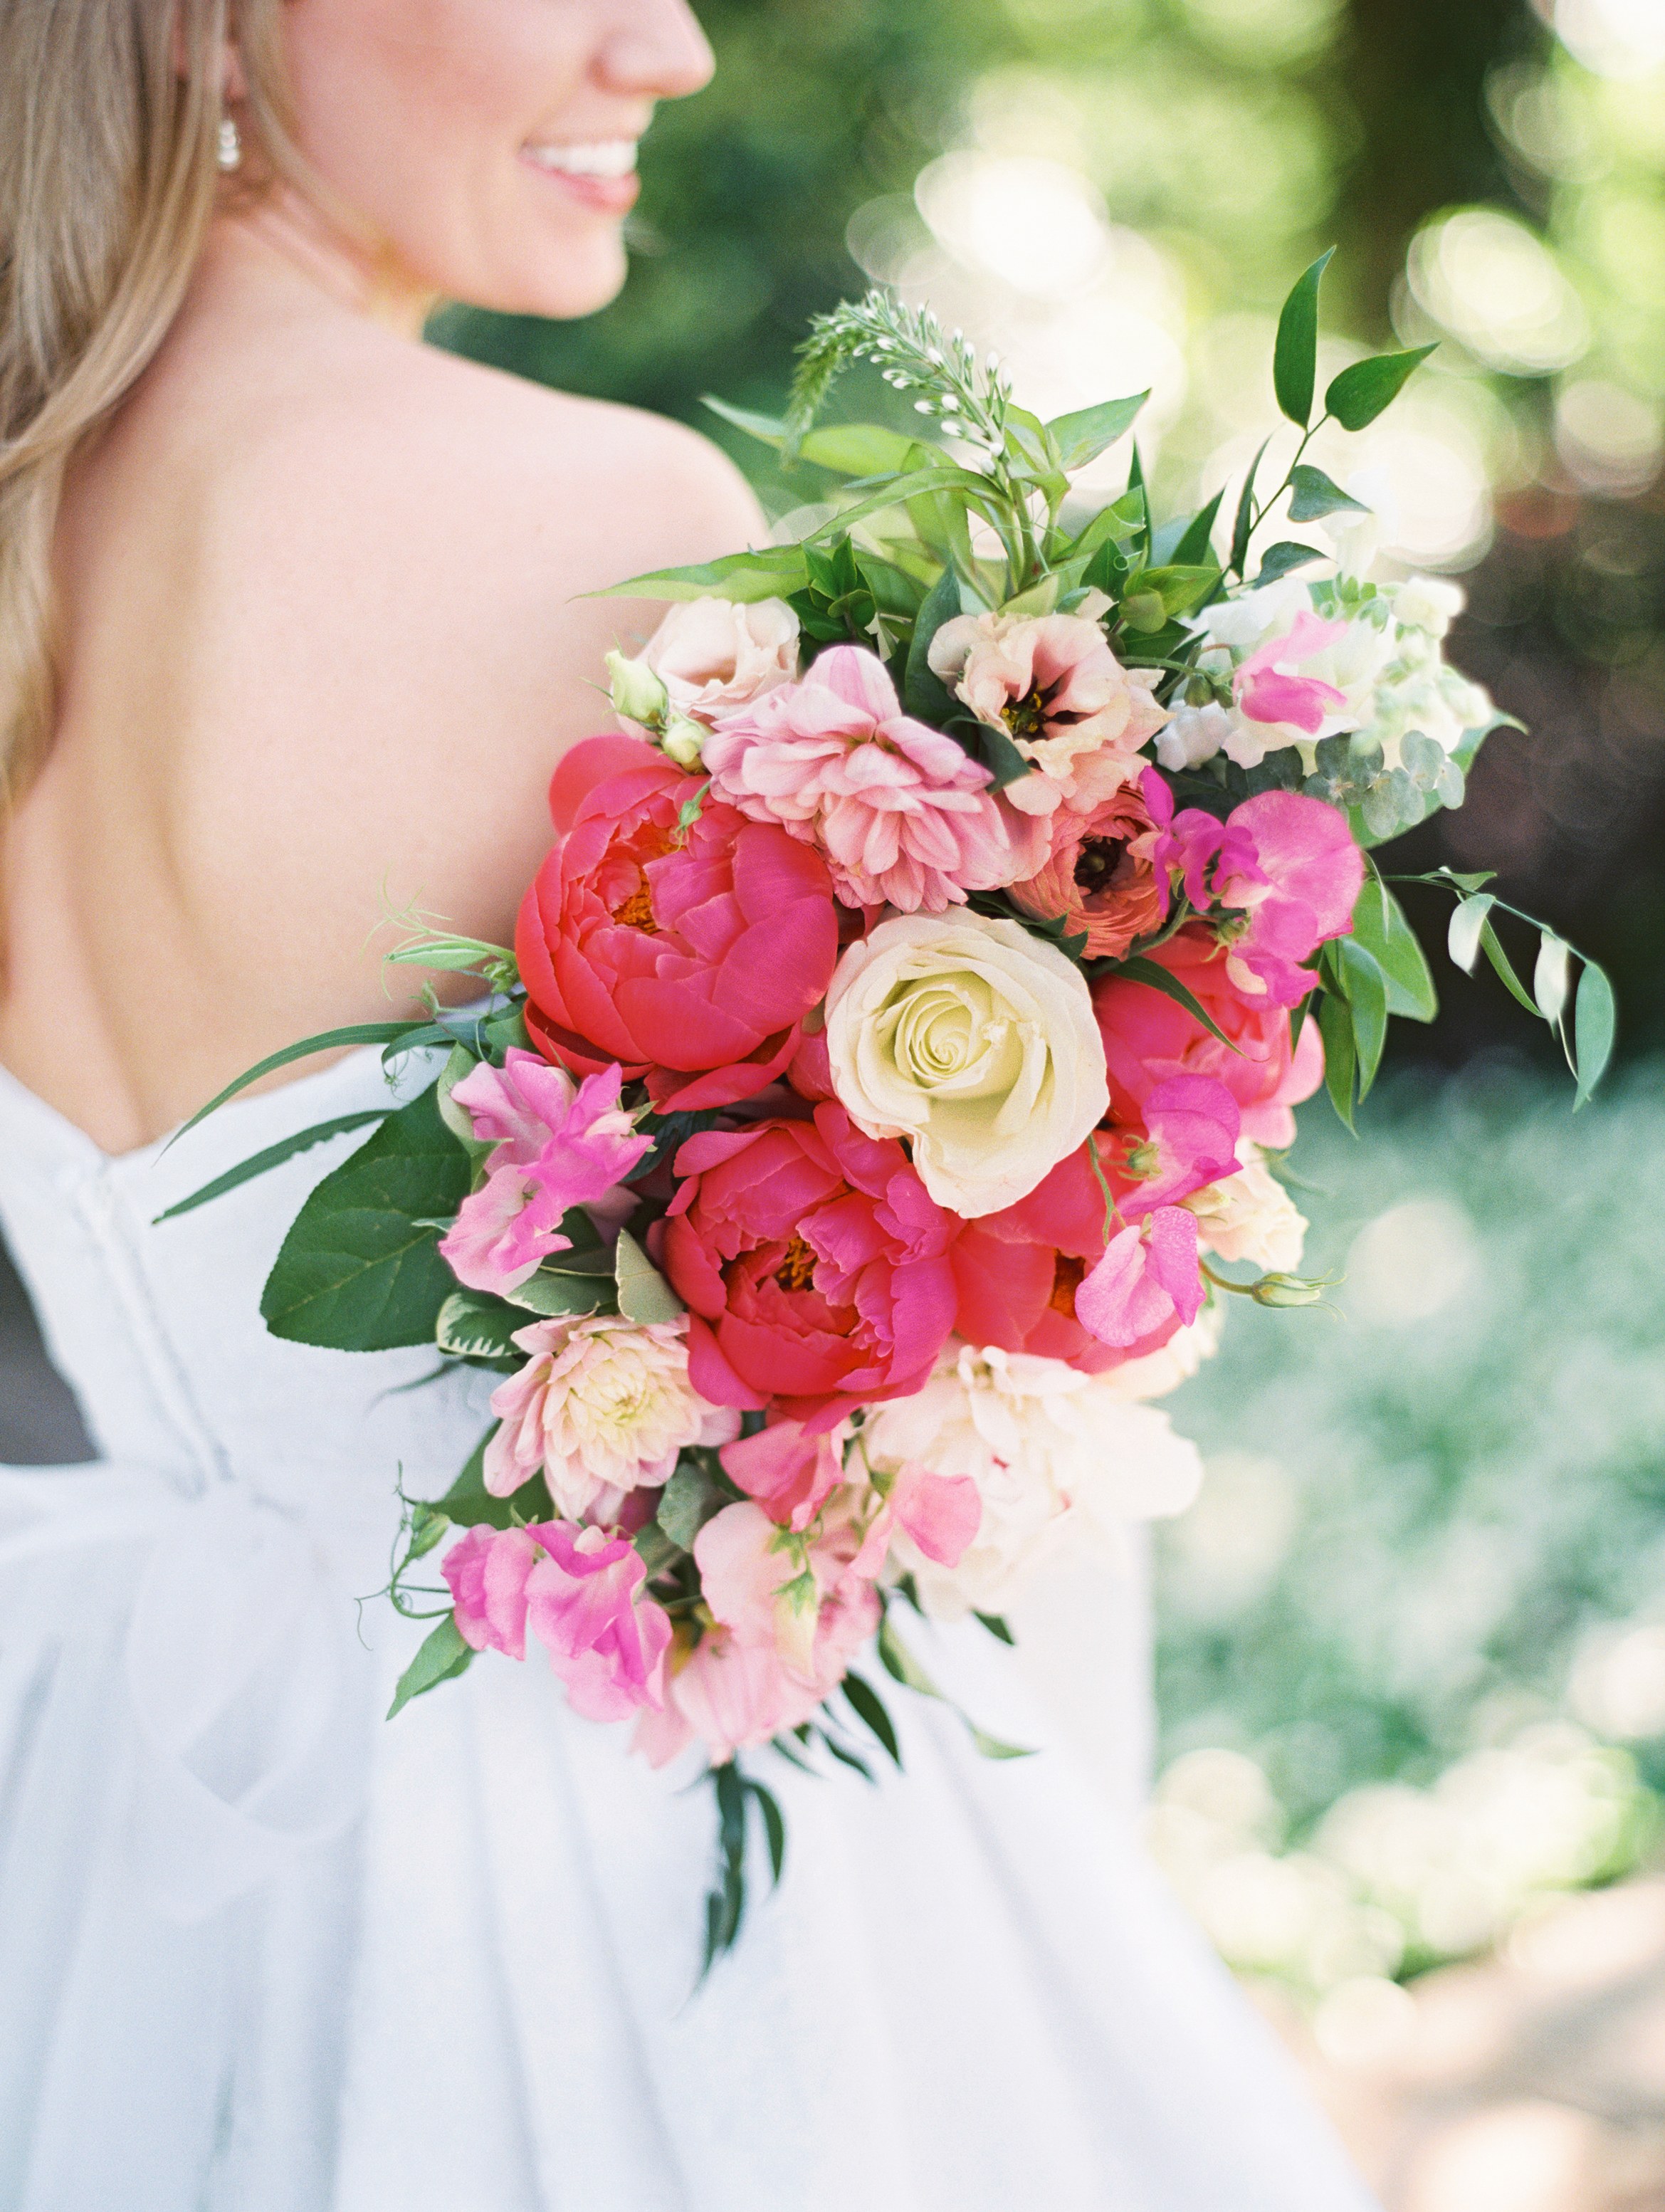 Spring Wedding Bouquets That Are Insanely Stunning | Brides